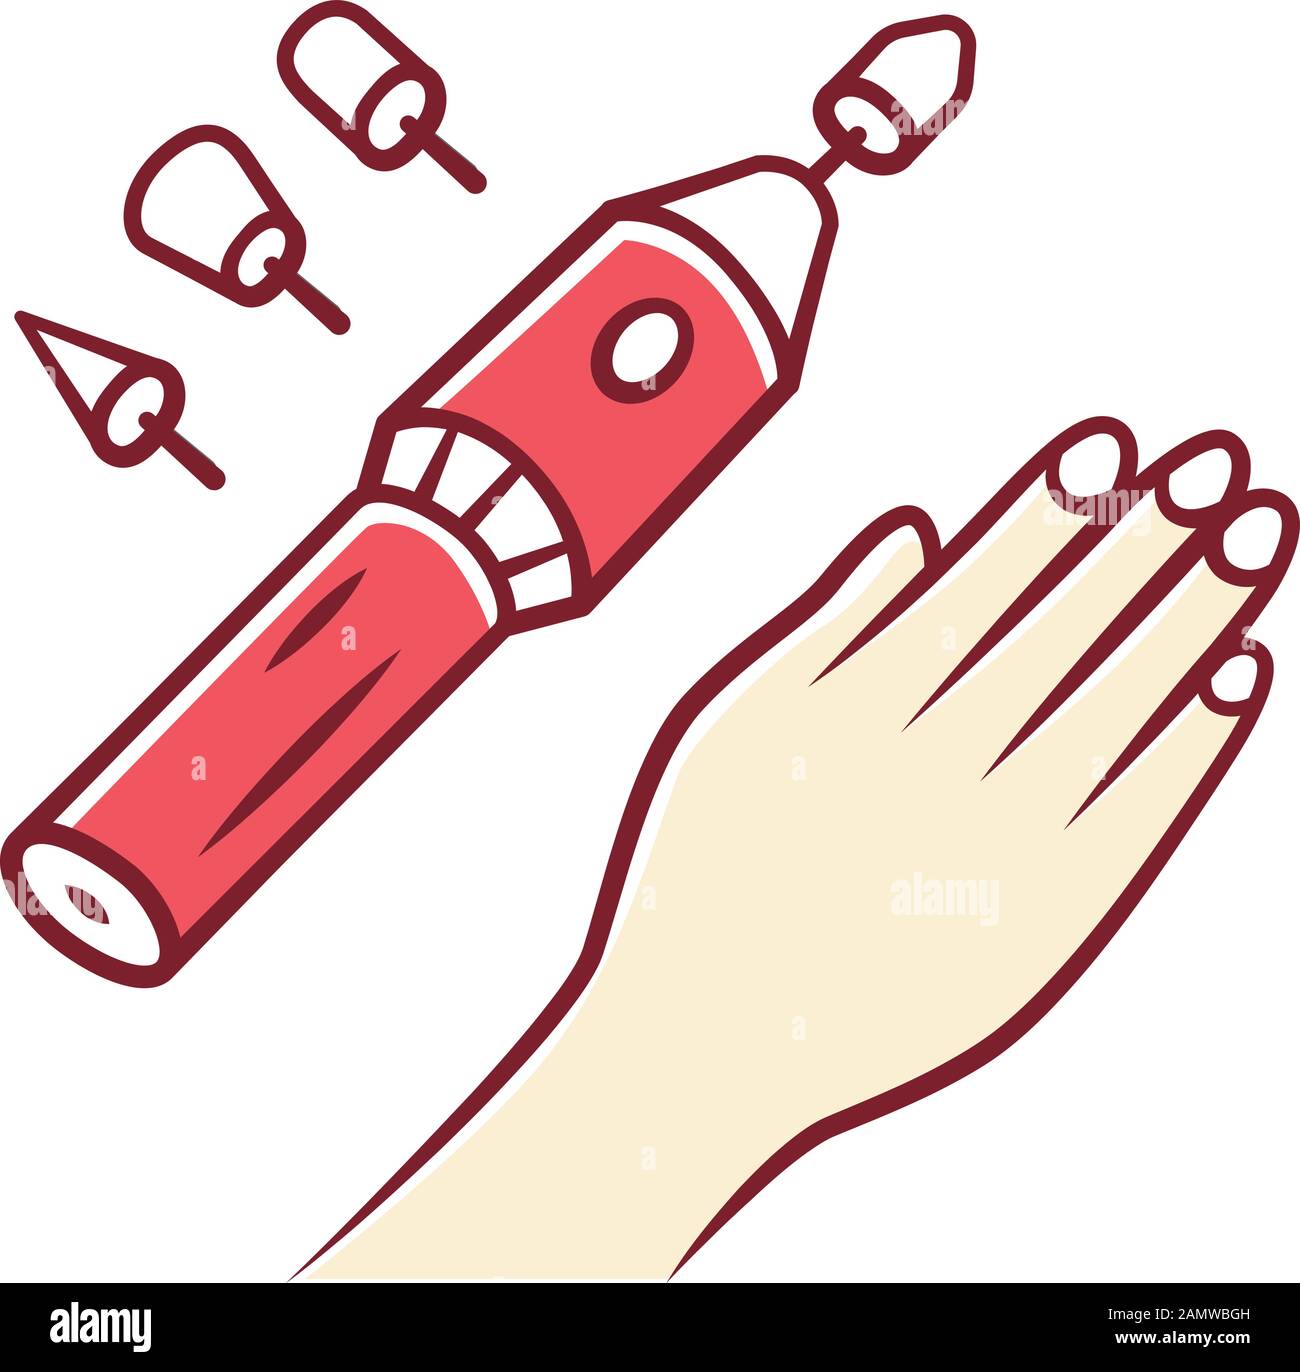 Electric manicure color icon. Electric nail file drill and nozzles. Beauty device for salon and home use. Nail care. Hand hygiene. Beauty instrument. Stock Vector